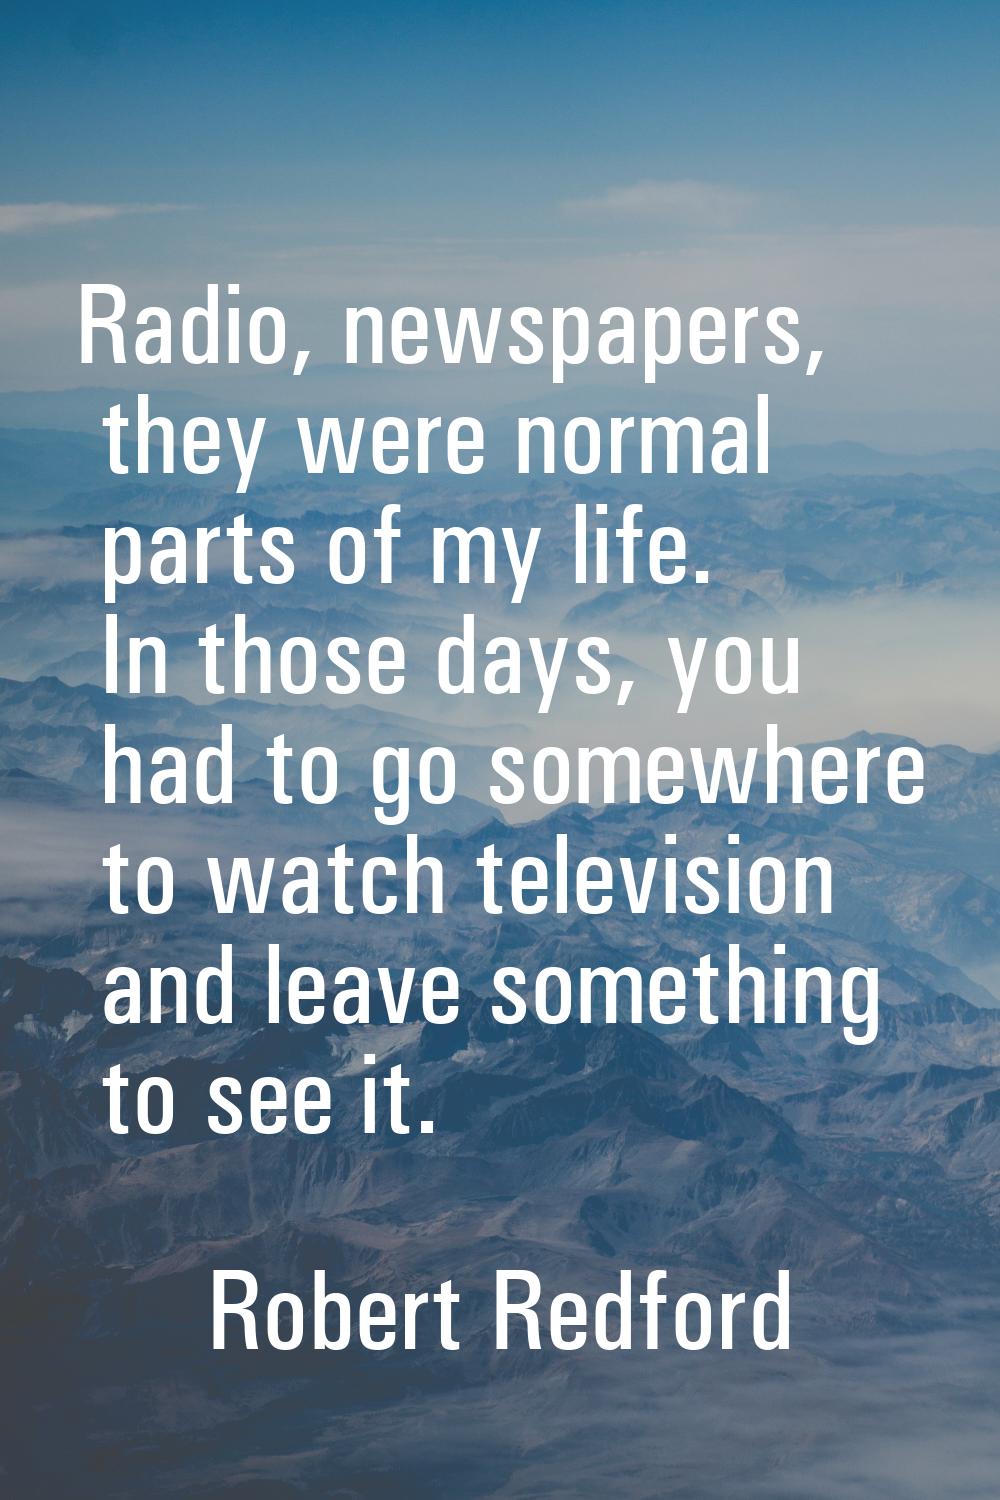 Radio, newspapers, they were normal parts of my life. In those days, you had to go somewhere to wat